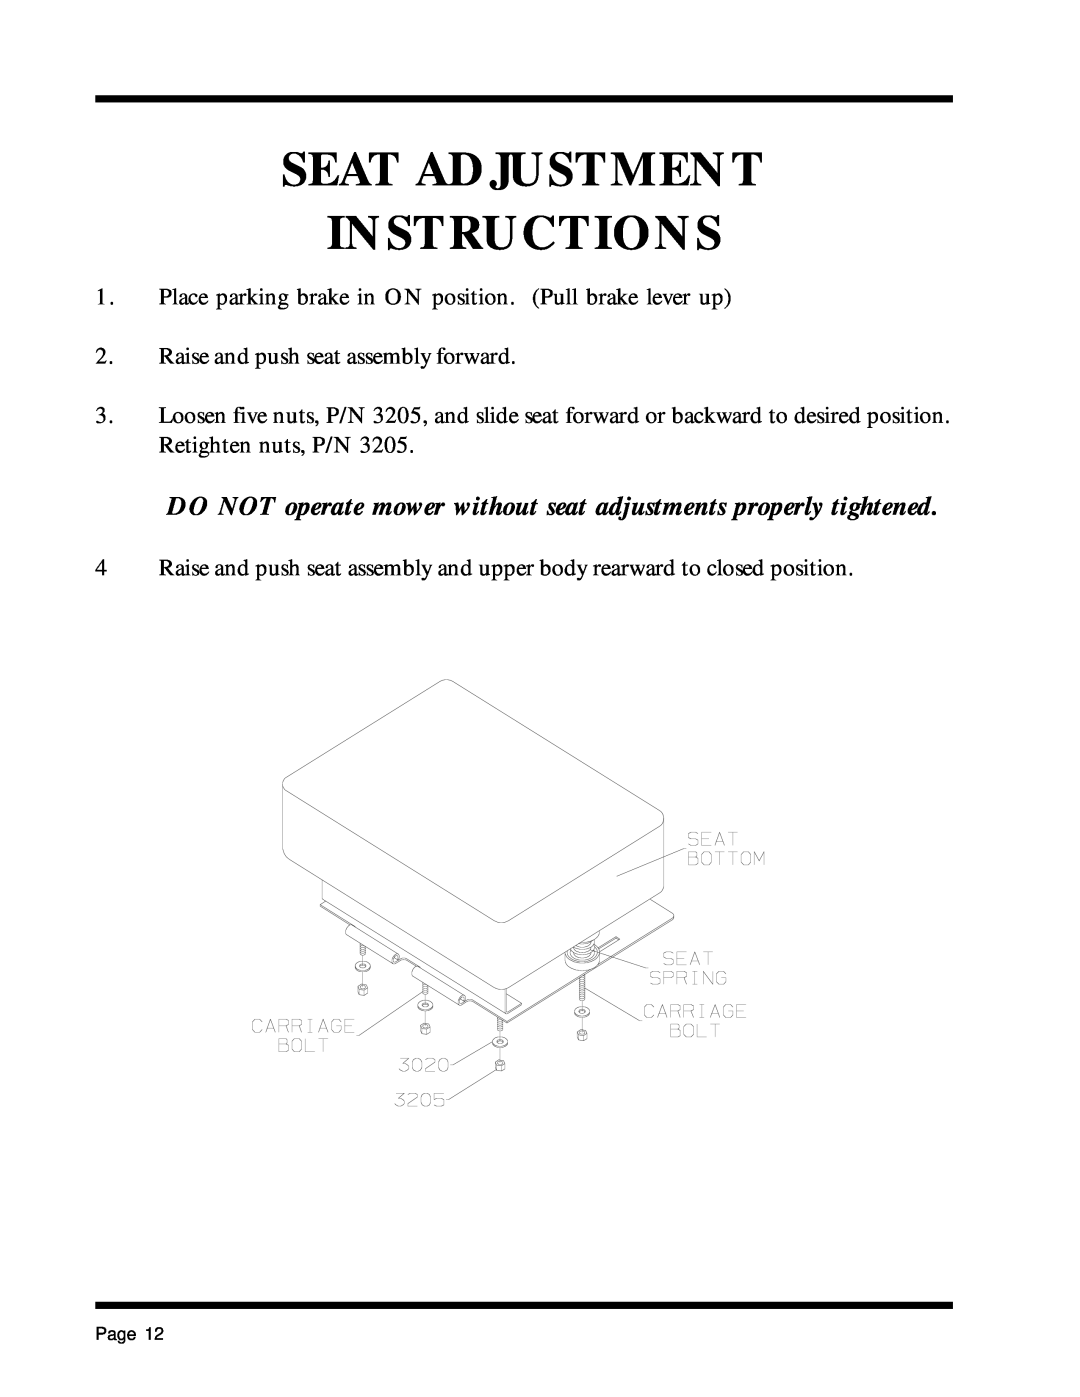 Dixon 1857-0599 manual Seat Adjustment Instructions, DO NOT operate mower without seat adjustments properly tightened, Page 